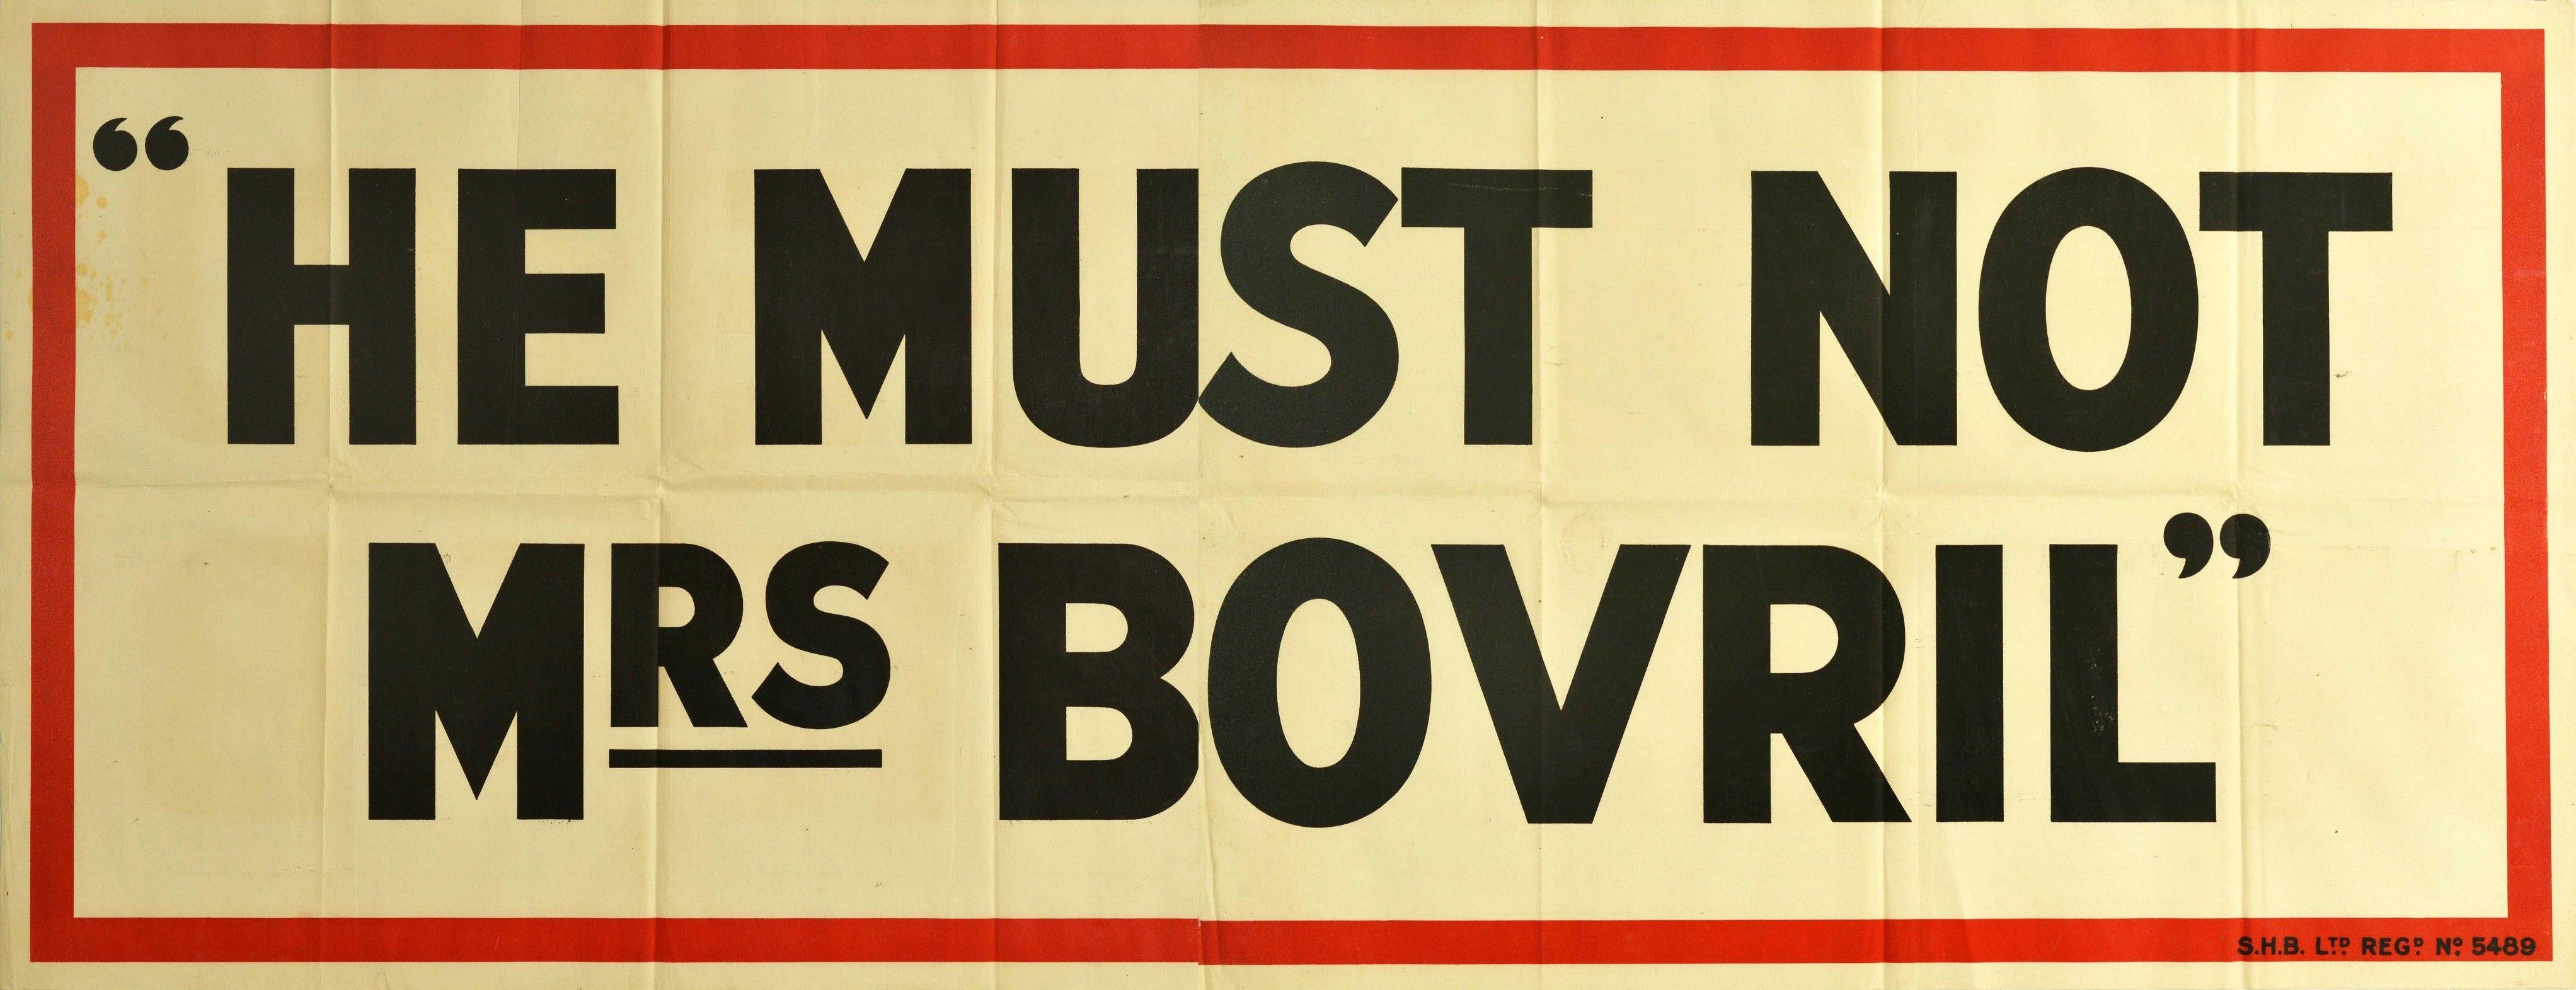 Unknown Print - Original Vintage Poster He Must Not Mrs Bovril Word Play Pun Drink Food Campaign